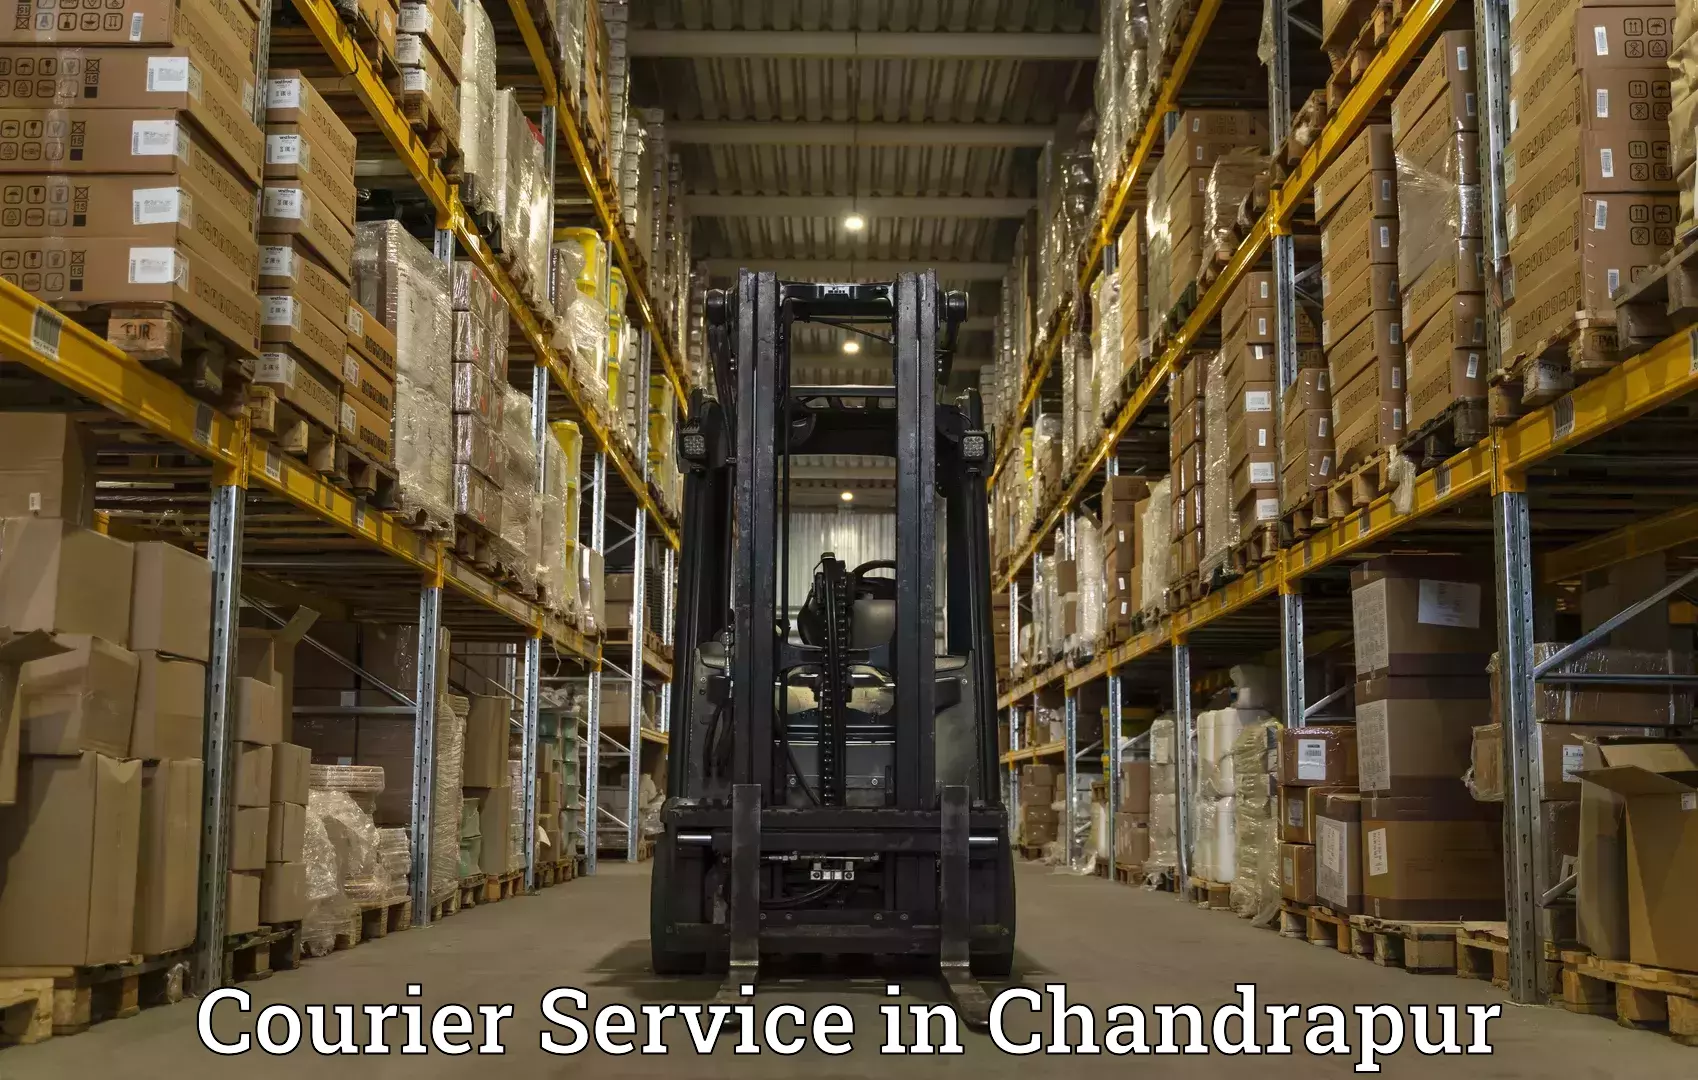 Short distance delivery in Chandrapur